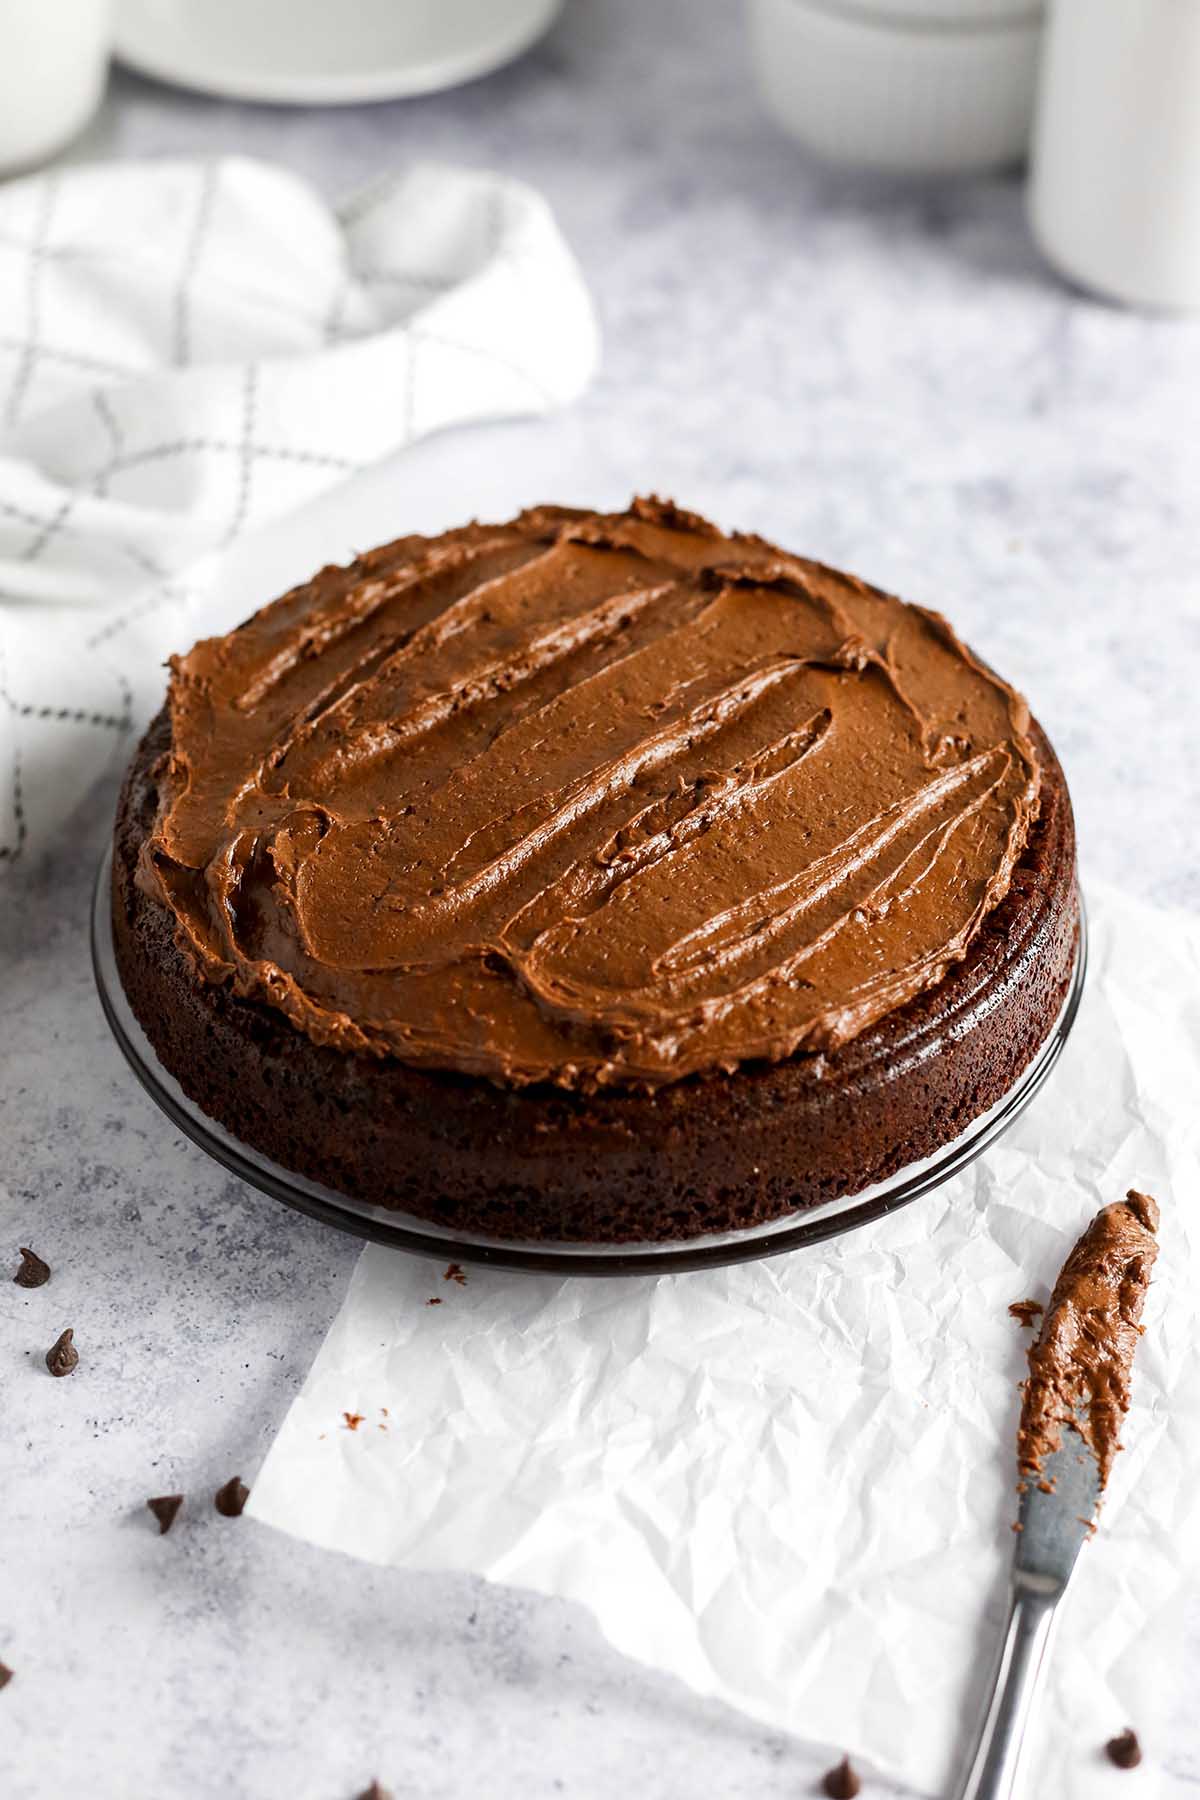 a chocolate cake on a clear glass plate with chocolate frosting spread on top